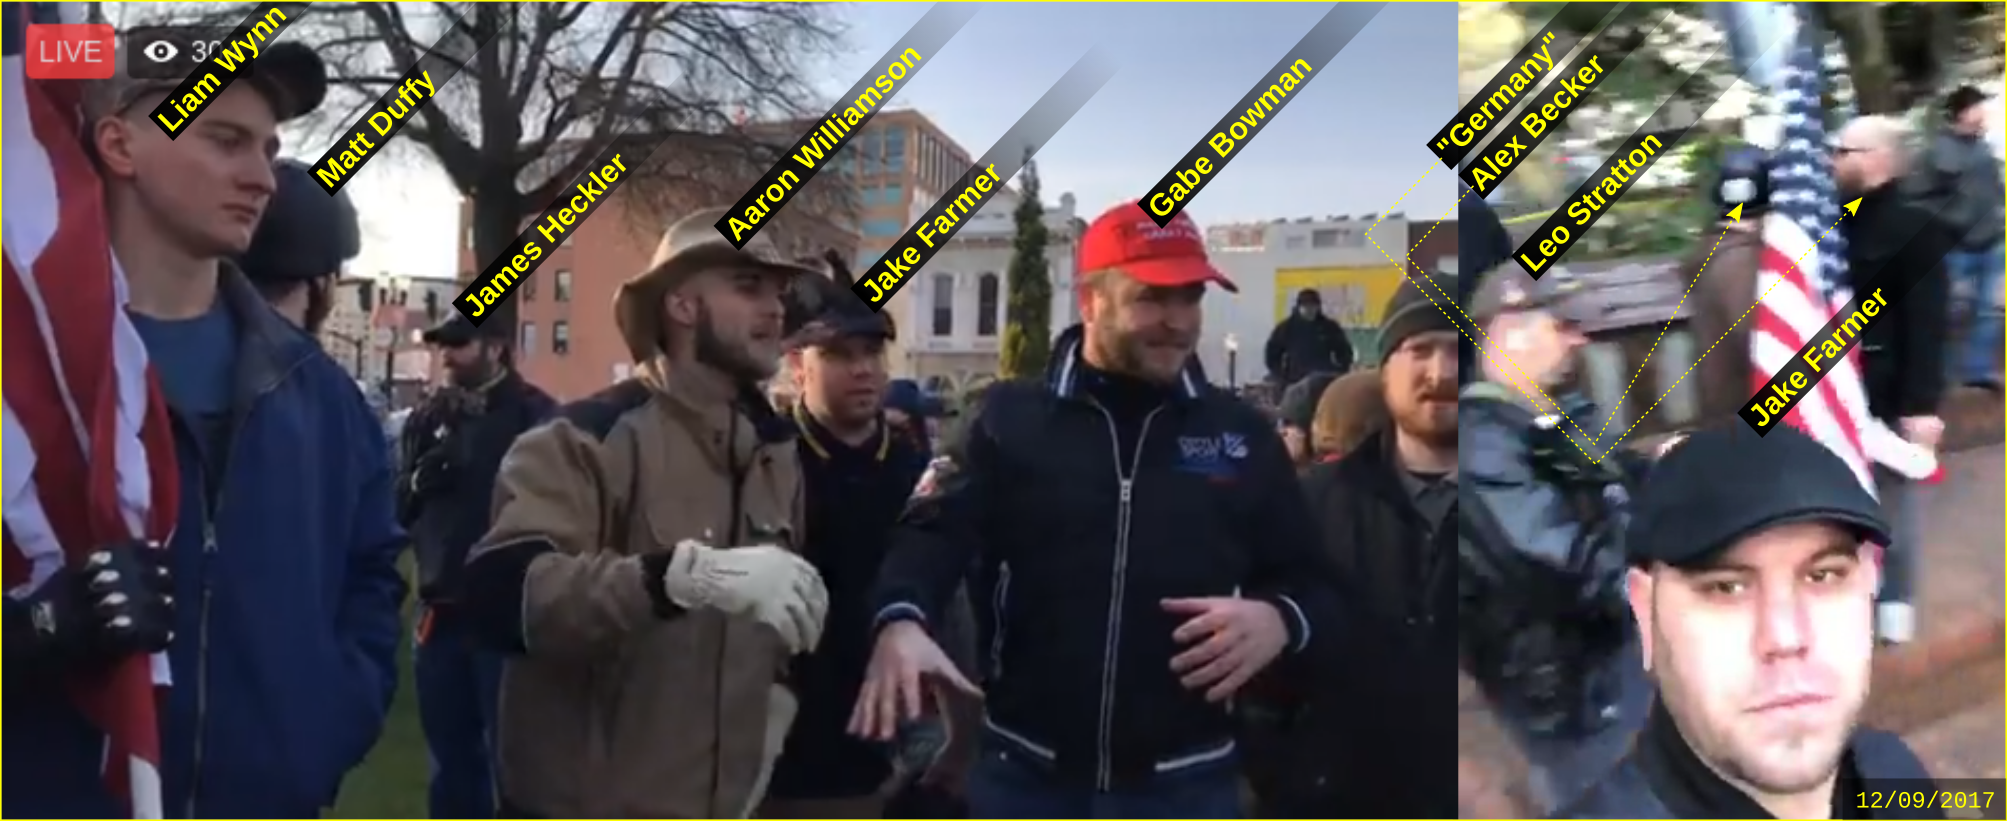 Jake Farmer at an anti-immigrant hate rally